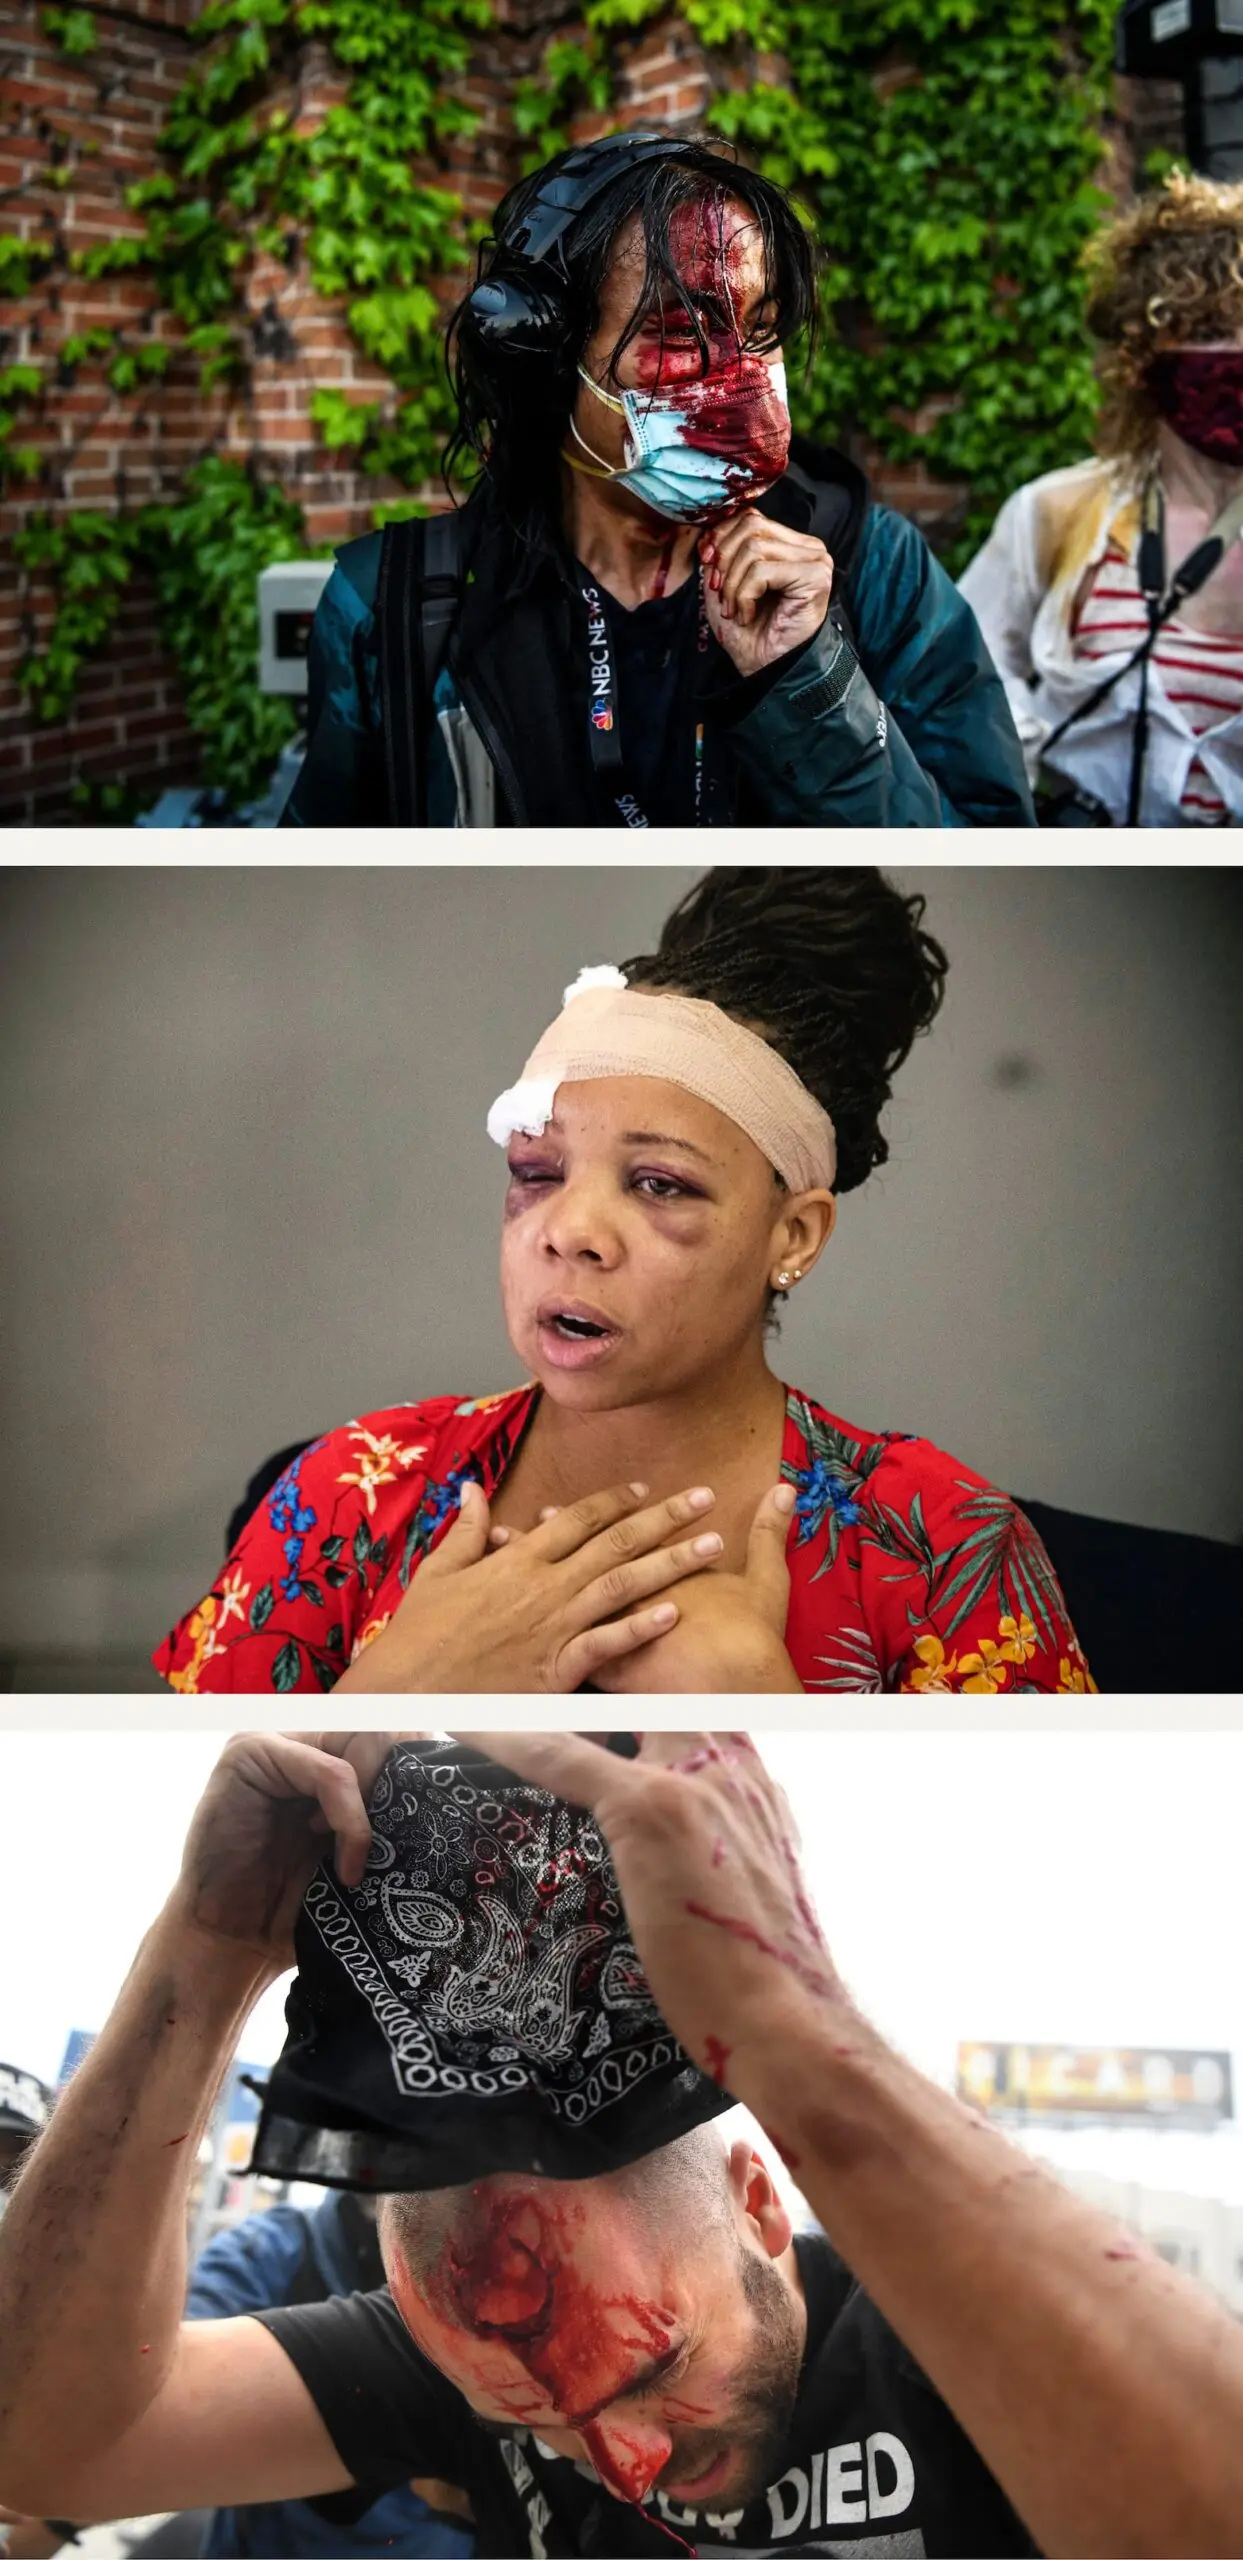 Three images, from top: A man bleeds from a wound on his head while wearing a surgical mask, a woman with a head wound and black eyes speaks, a man holds a hankercheif near a bleeding wound in his forehead.